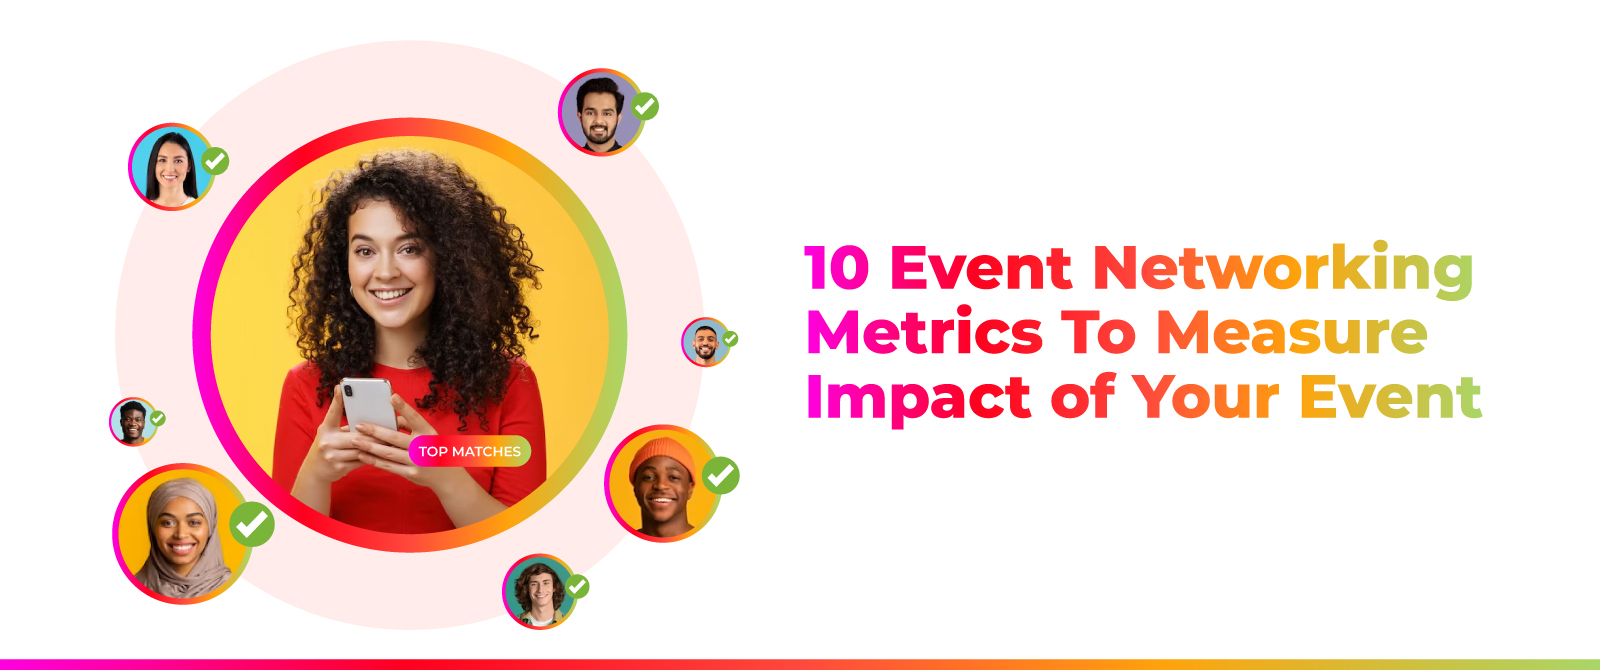 10 Event Networking Metrics To Measure Impact of Your Event